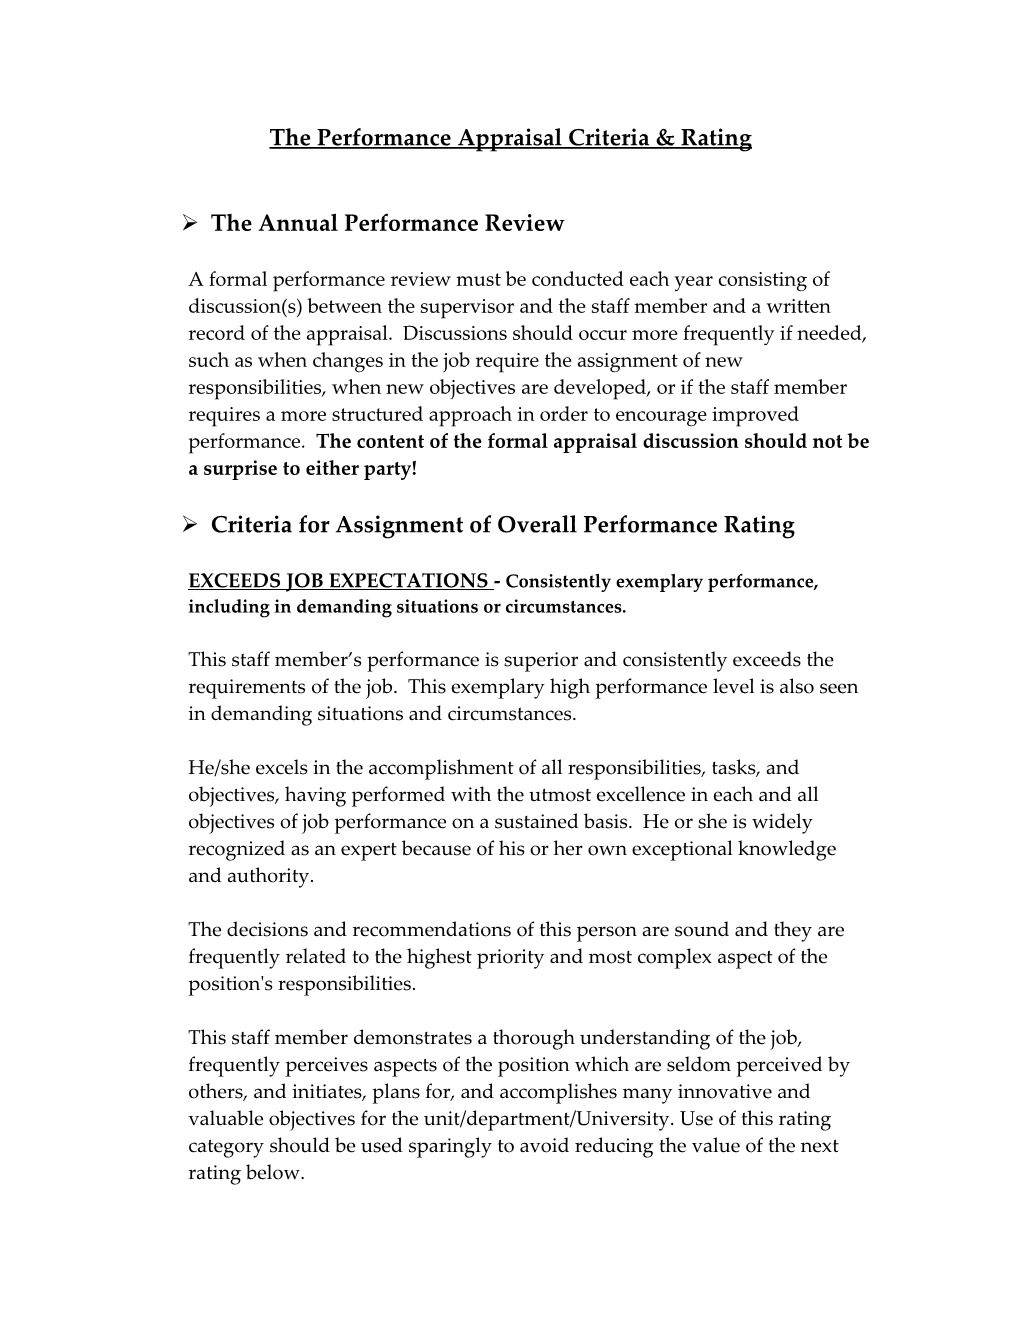 The Performance Appraisal Criteria & Rating